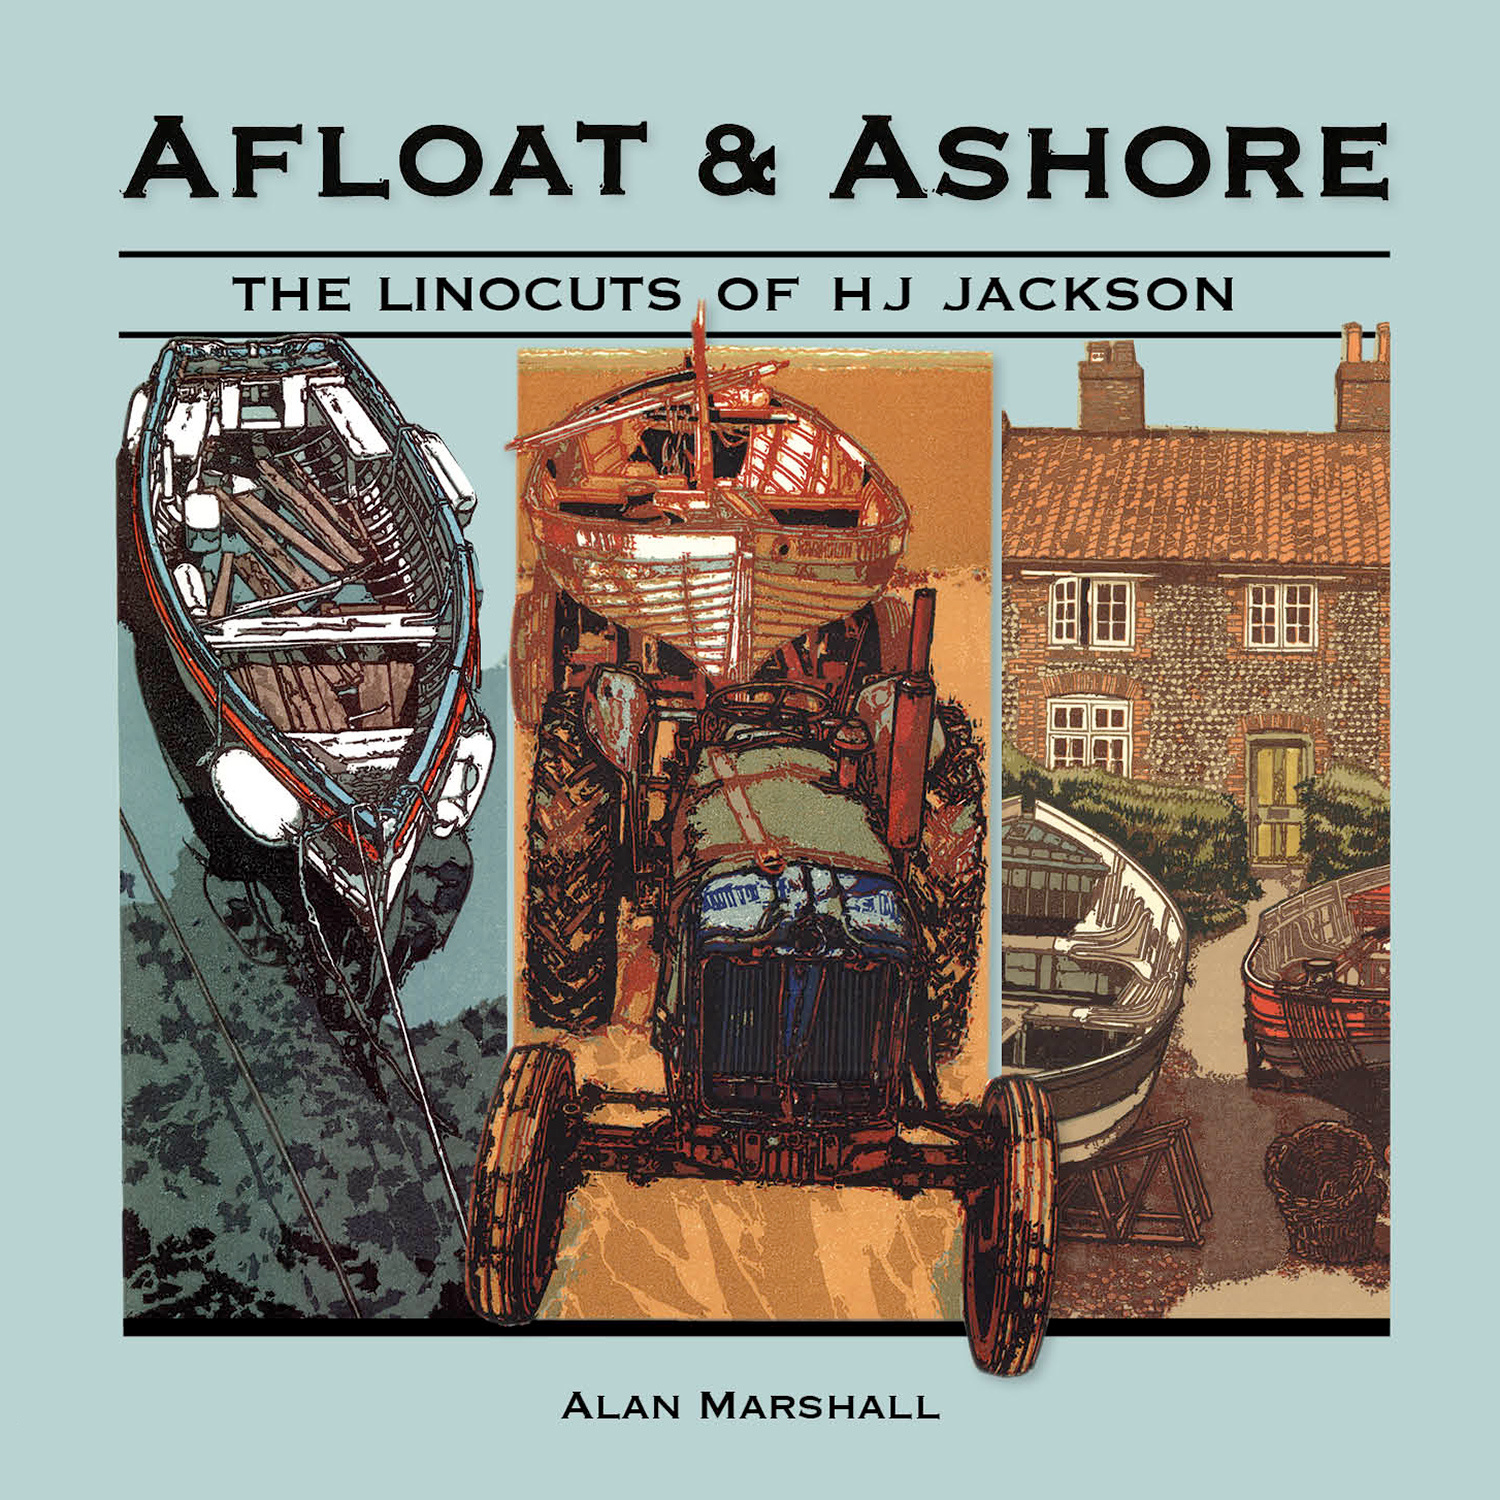 Afloat & Ashore - The Linocuts of HJ Jackson by H.J. Jackson